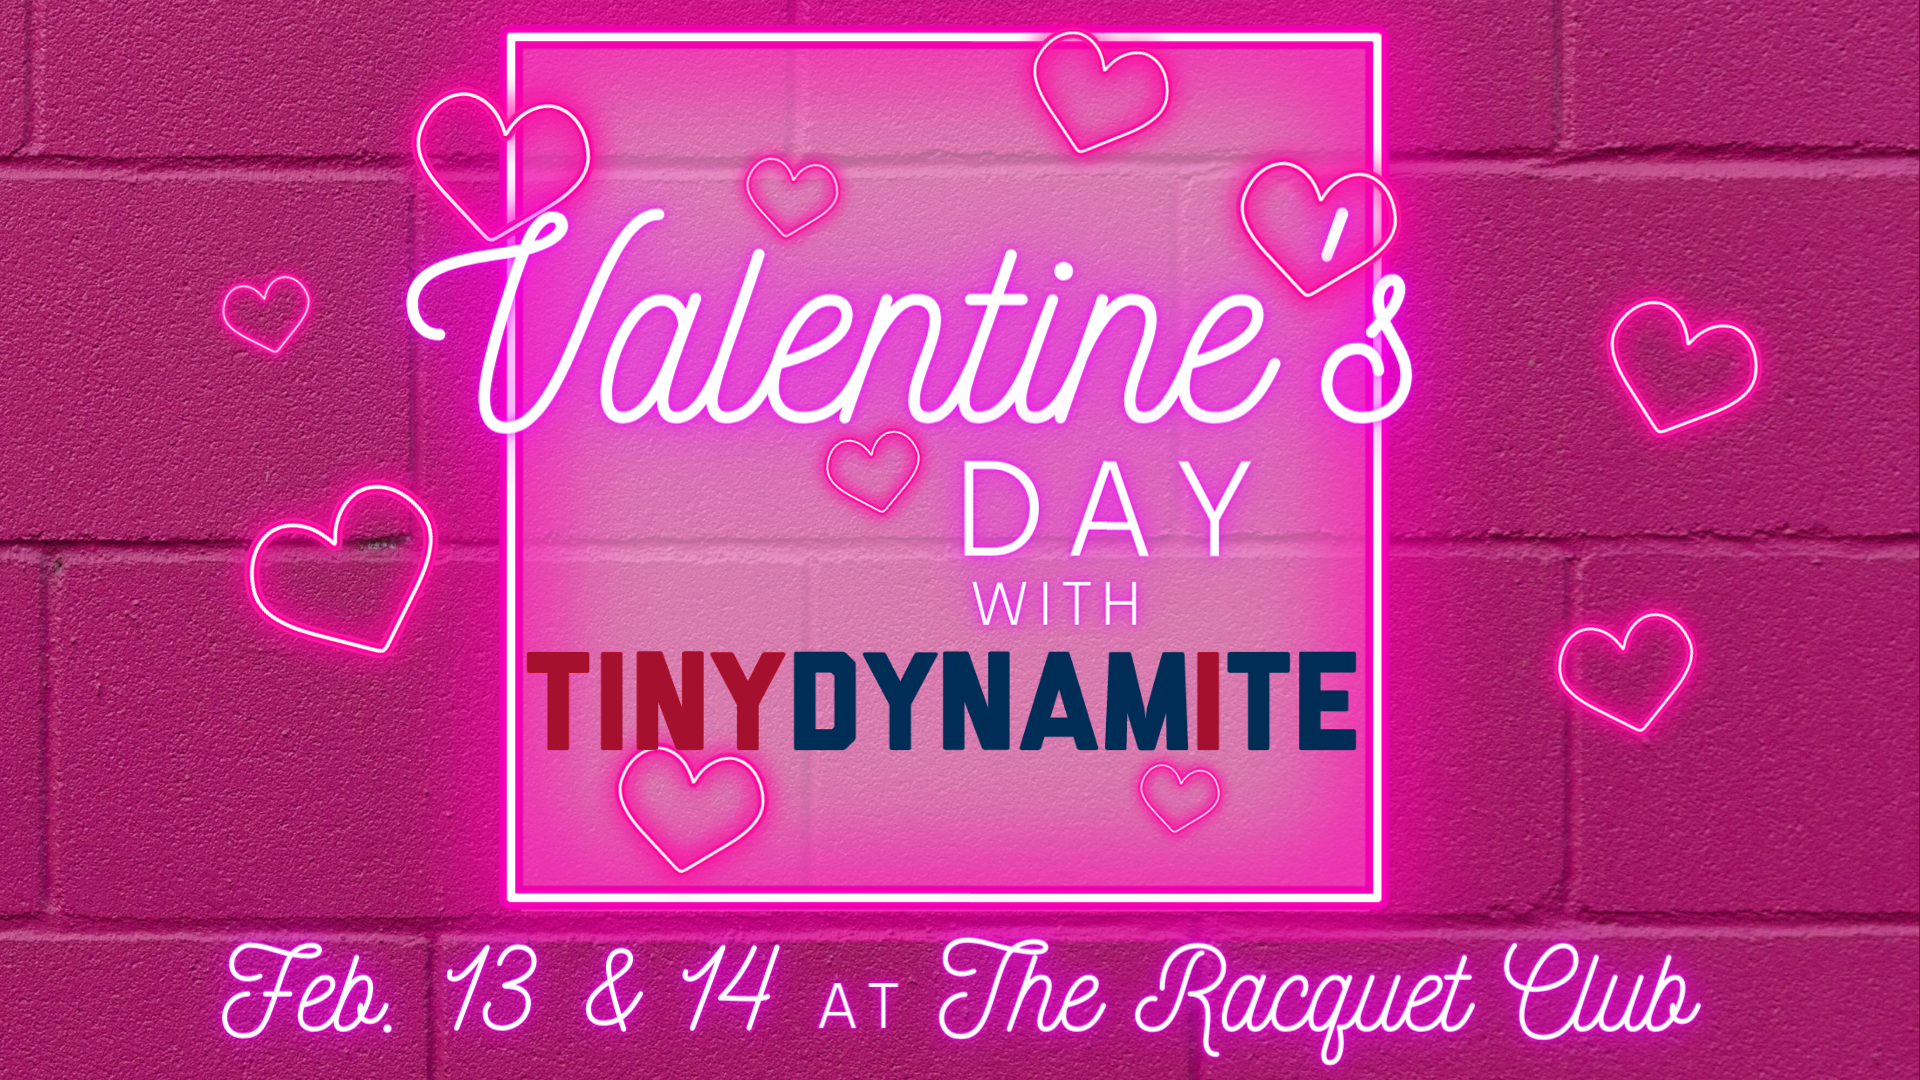 Pink neon text and hearts on a bright pink concrete block wall. Text reads: "Valentine's Day with Tiny Dynamite. Feb. 13 & 14 at The Racquet Club"